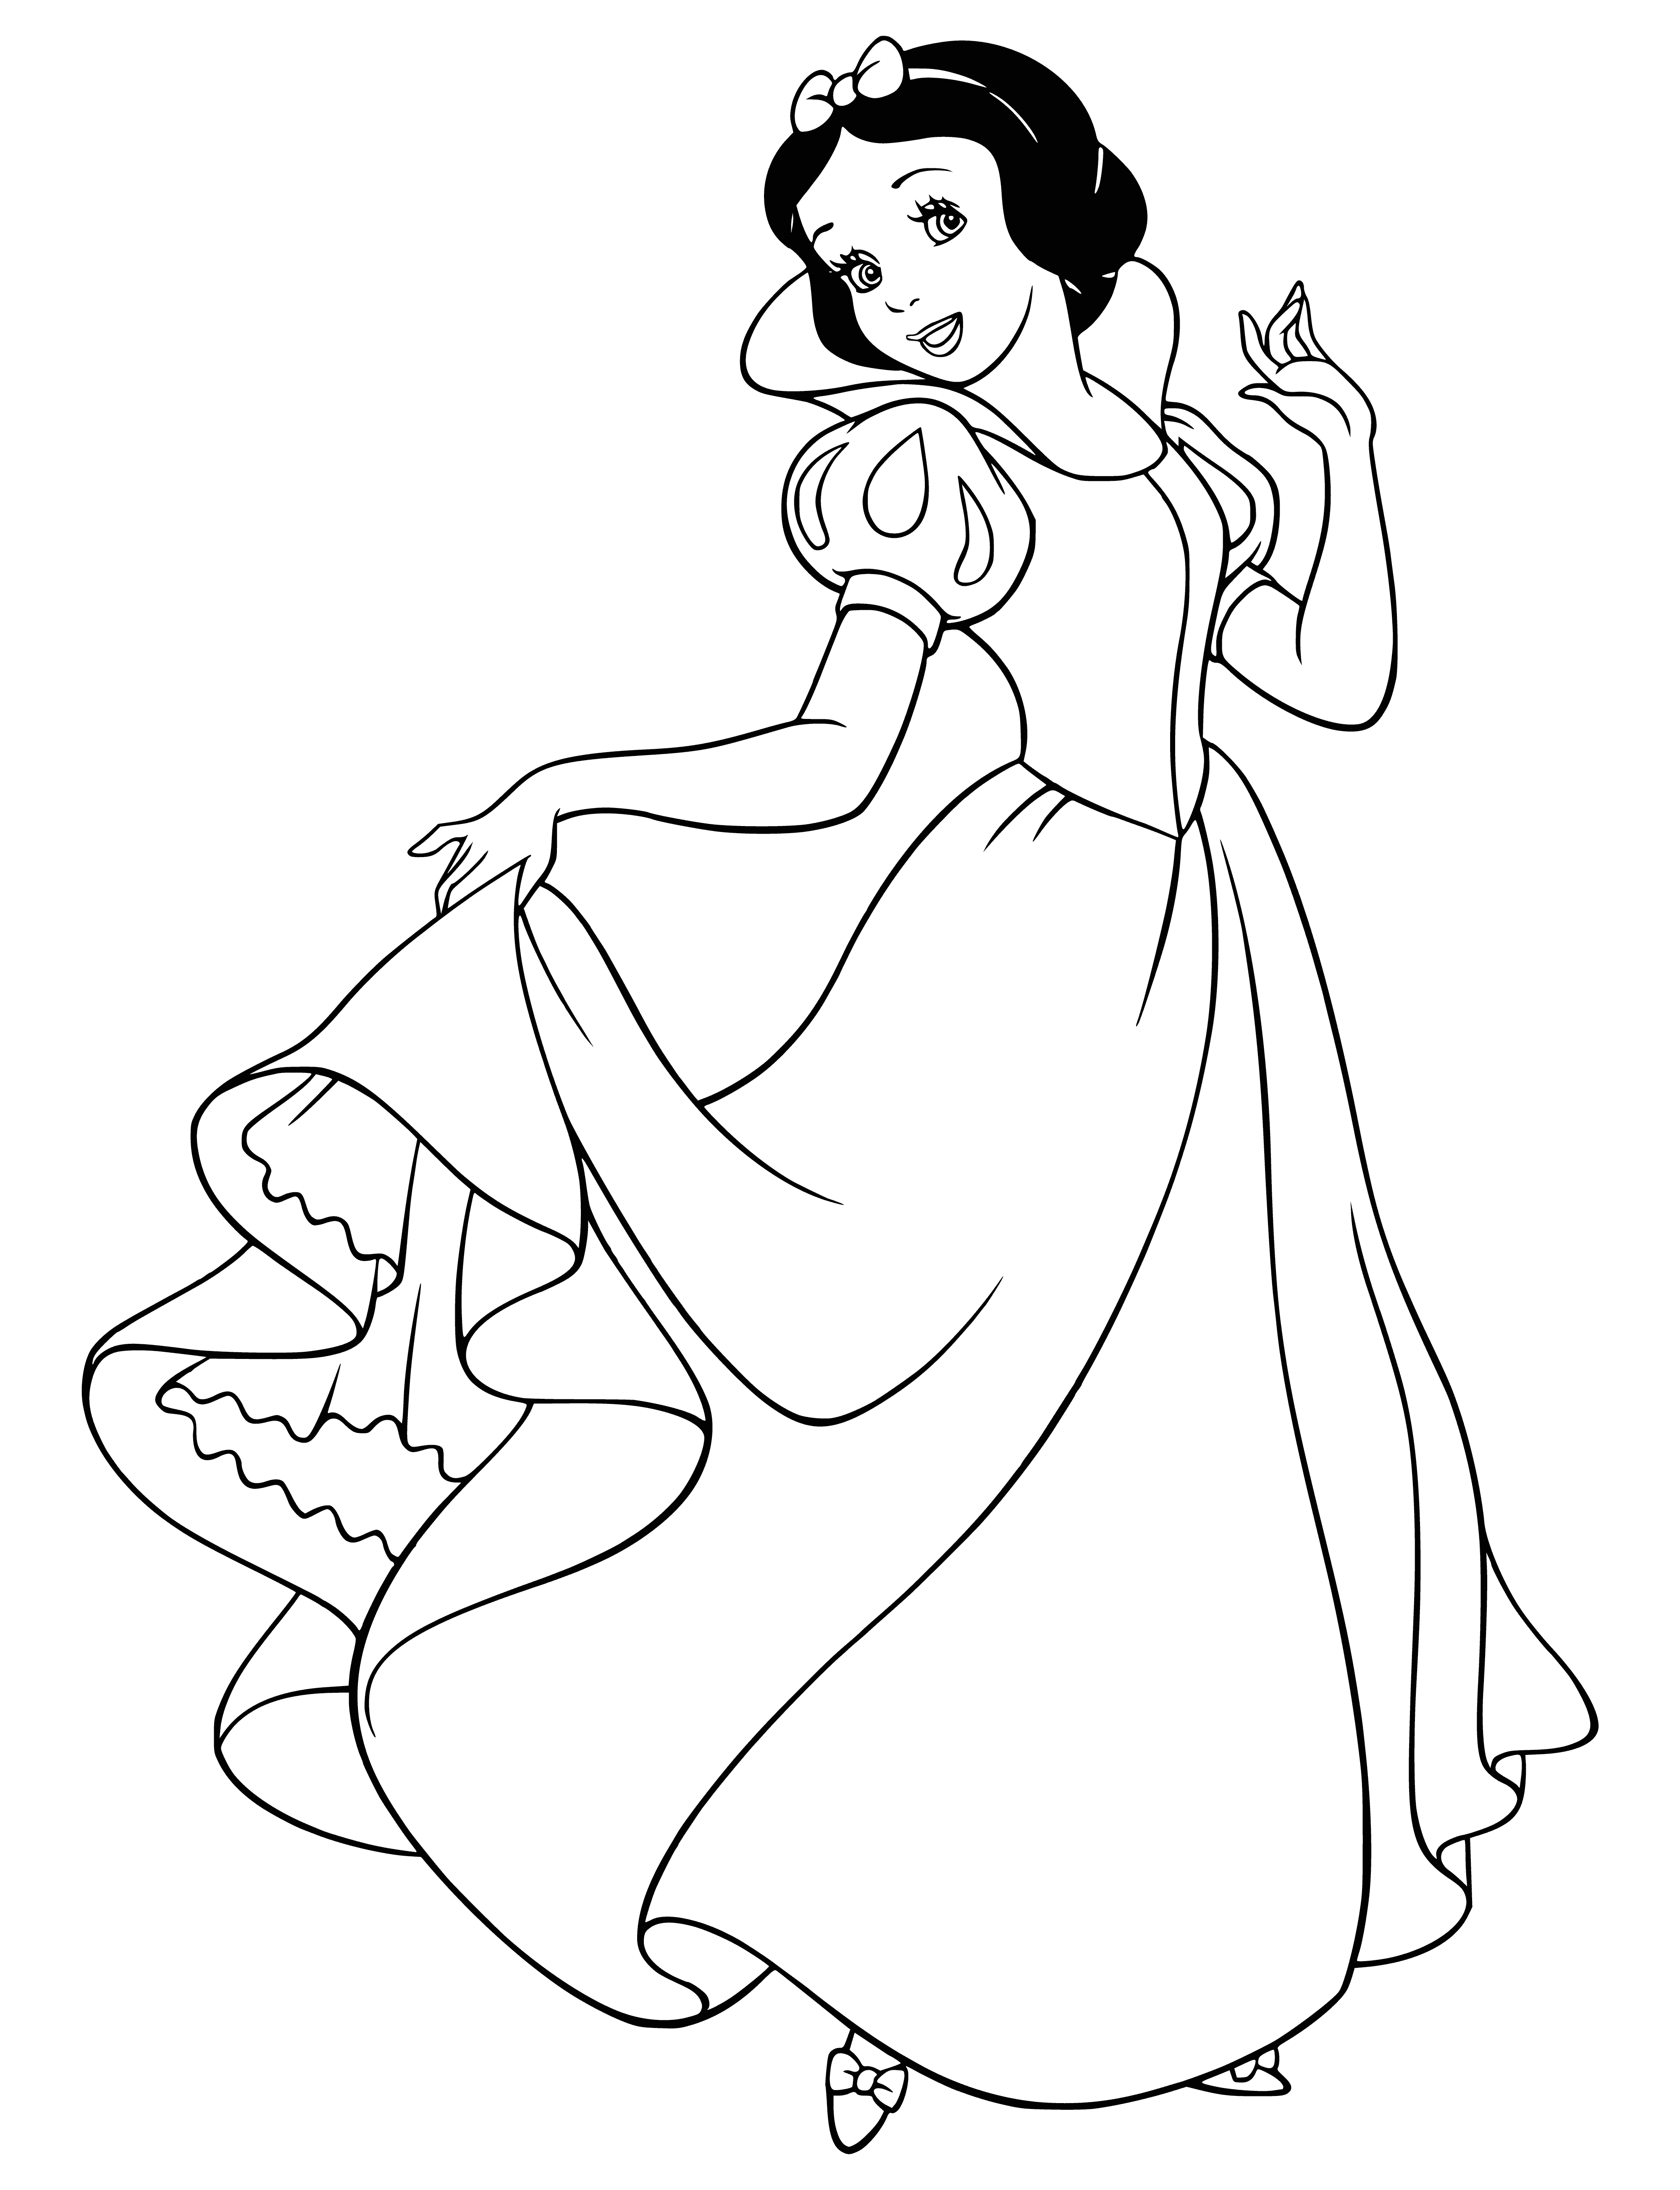 coloring page: Snow White is a beautiful young woman with long dark hair and pale skin, adorned in a white dress and a matching cloak with a hood. She holds an apple in her hand.